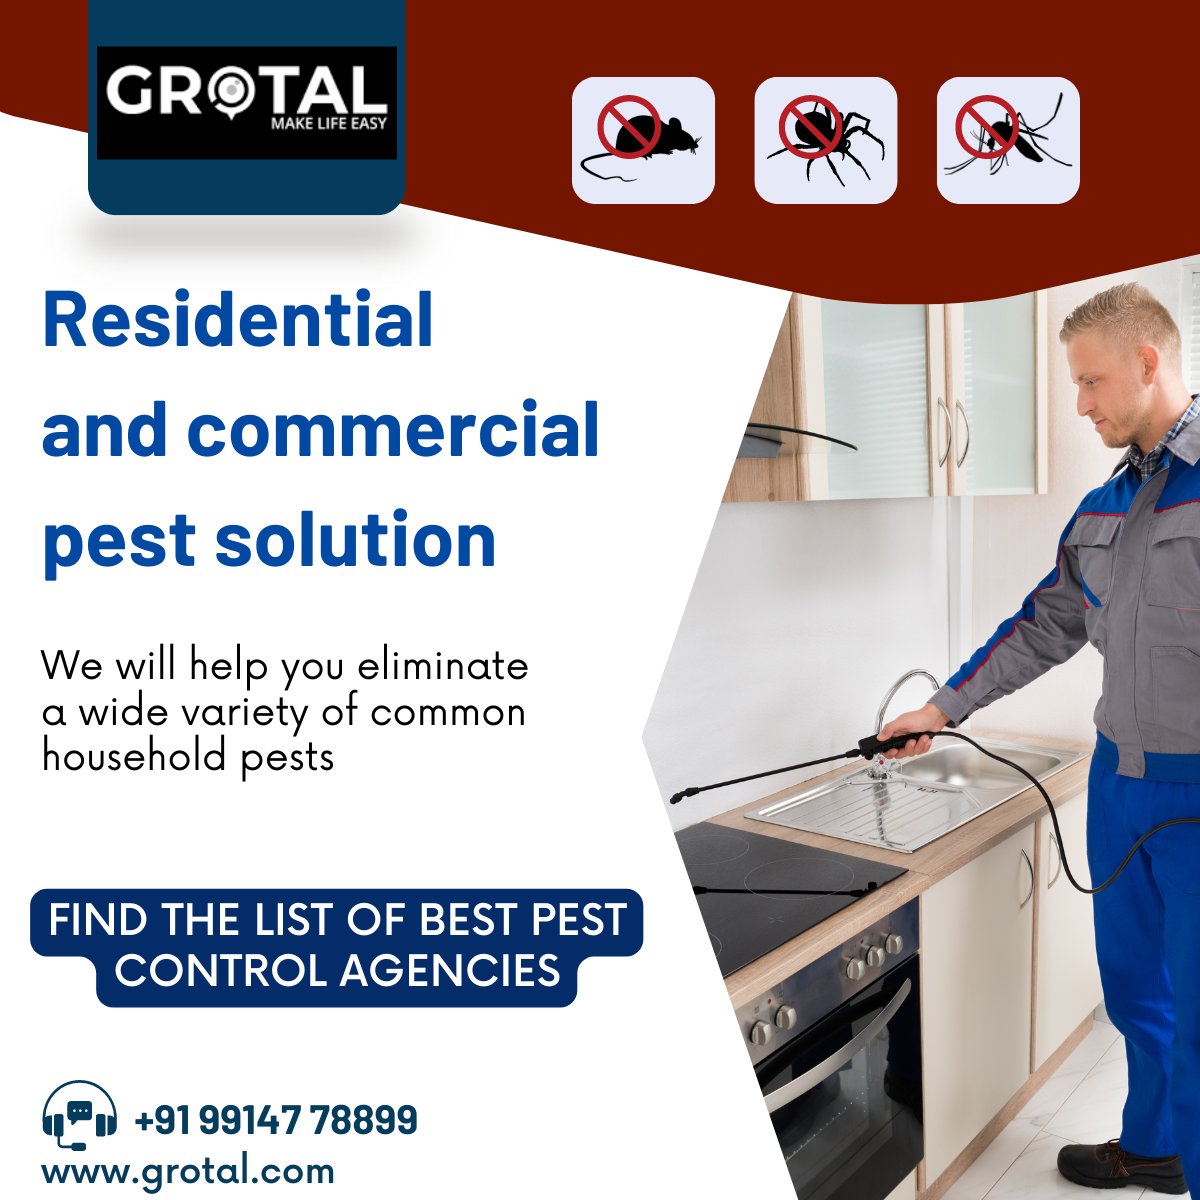 Control pest infestation at your home this summer with expert pest control services at Grotal.
bit.ly/45cbTIX
#pestcontrol #pestmanagement #pestcontrol #pestcontroltips #grotal